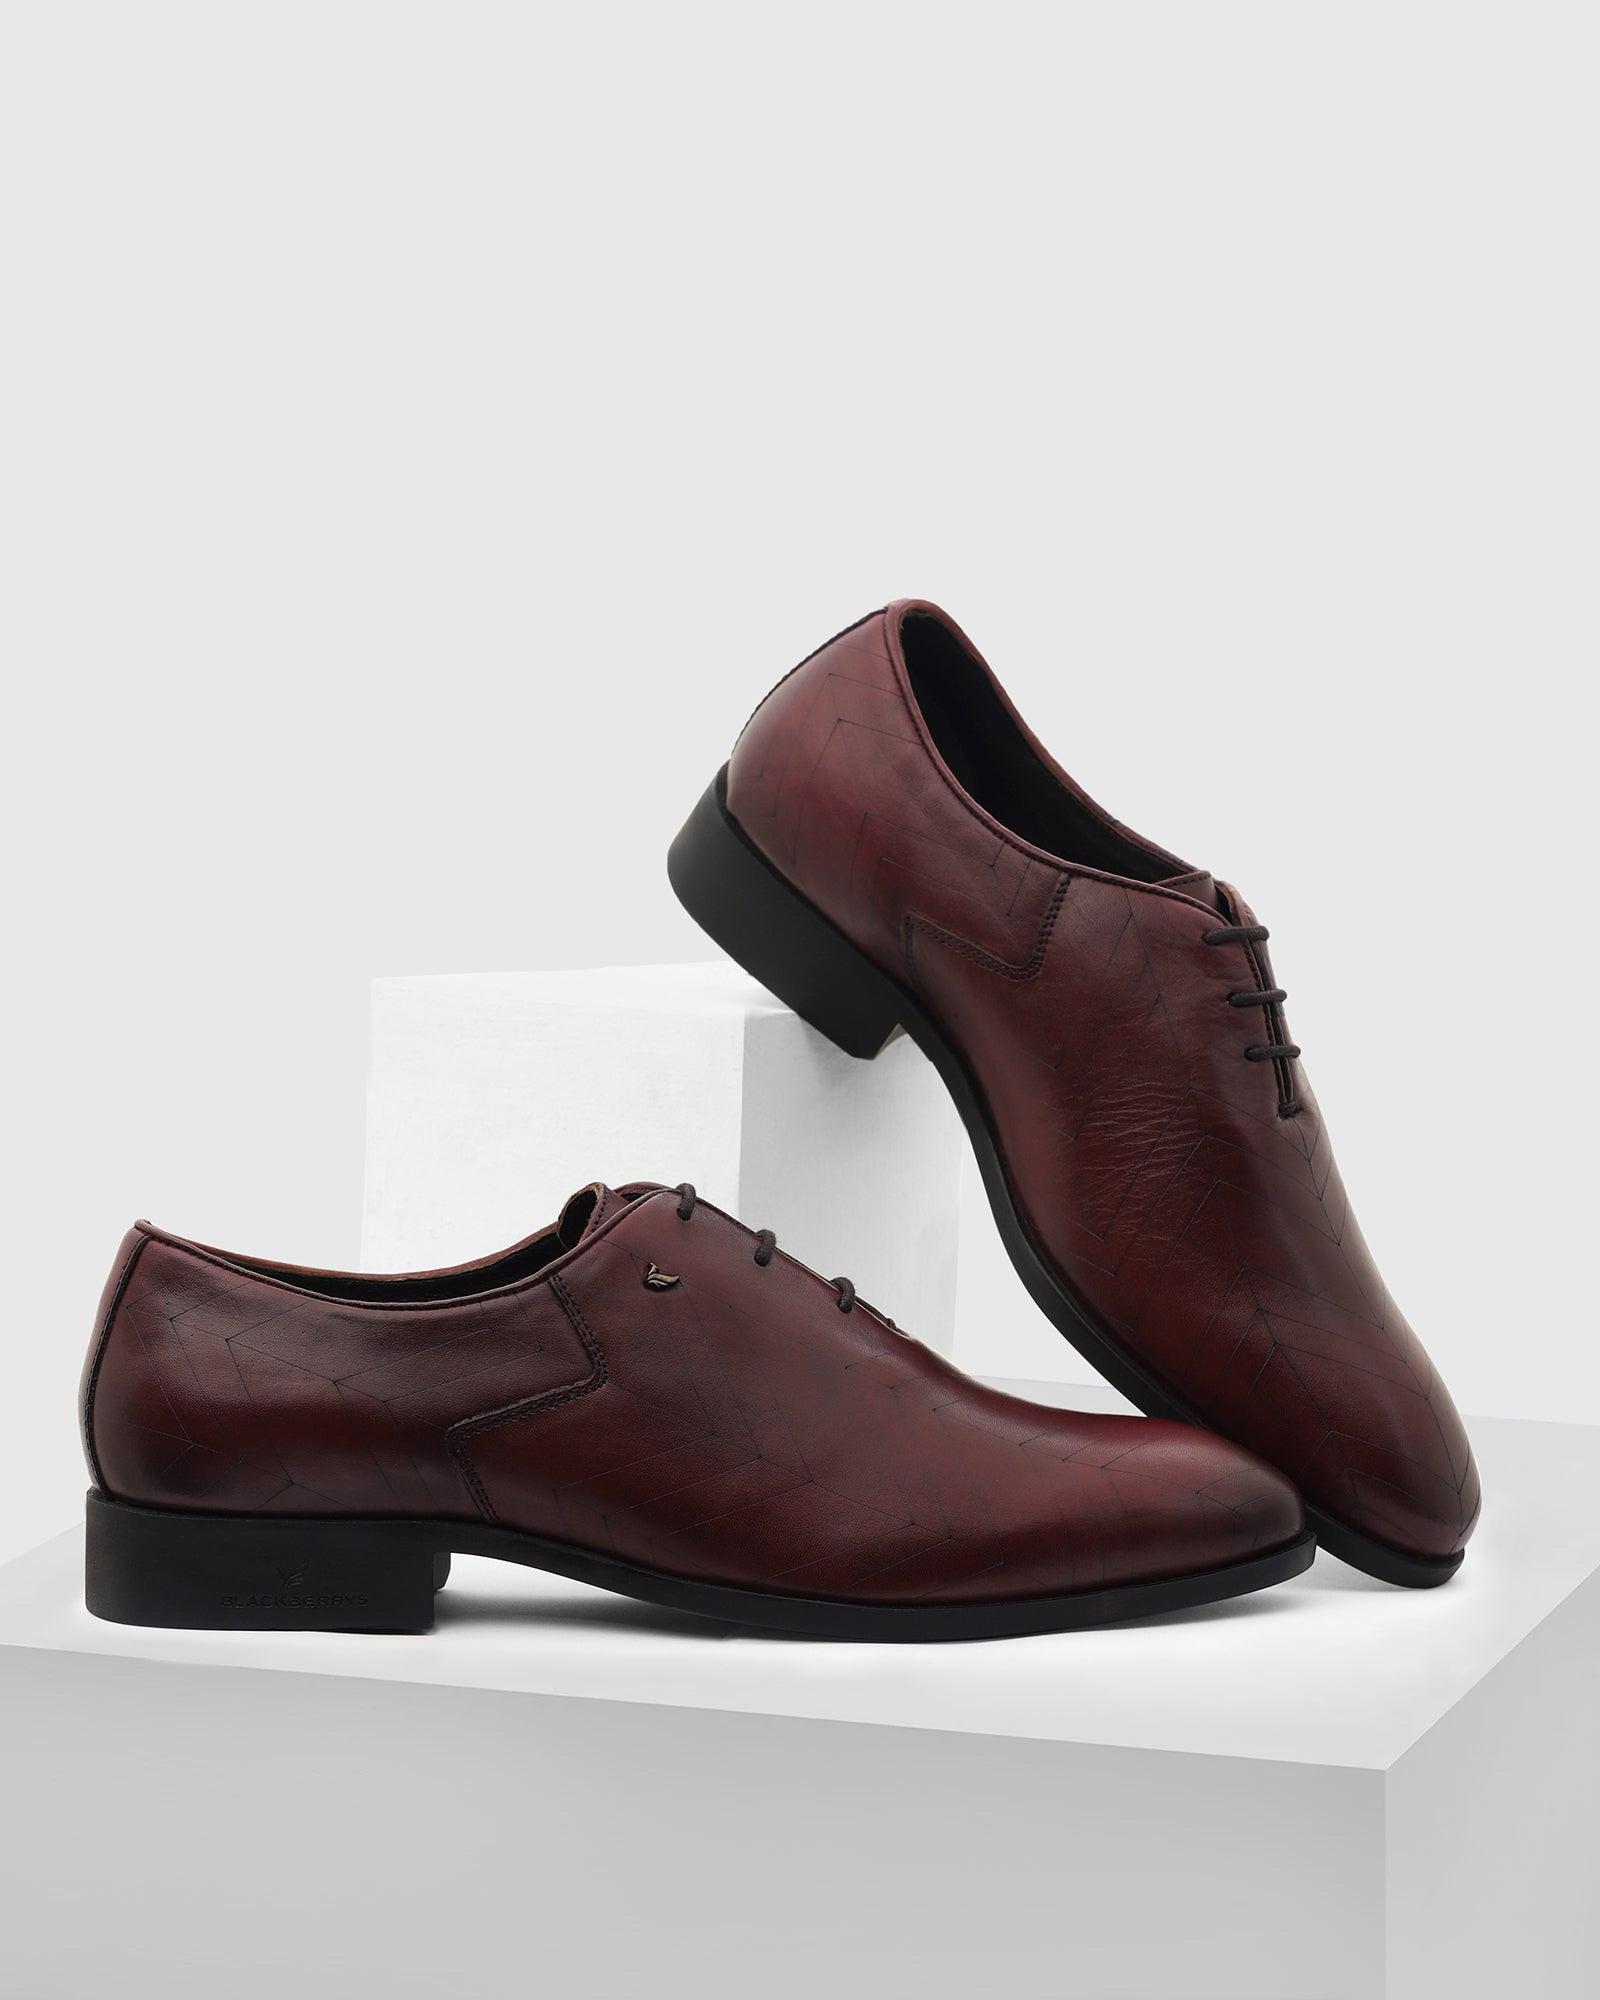 leather-formal-burgandy-solid-oxford-shoes---prob